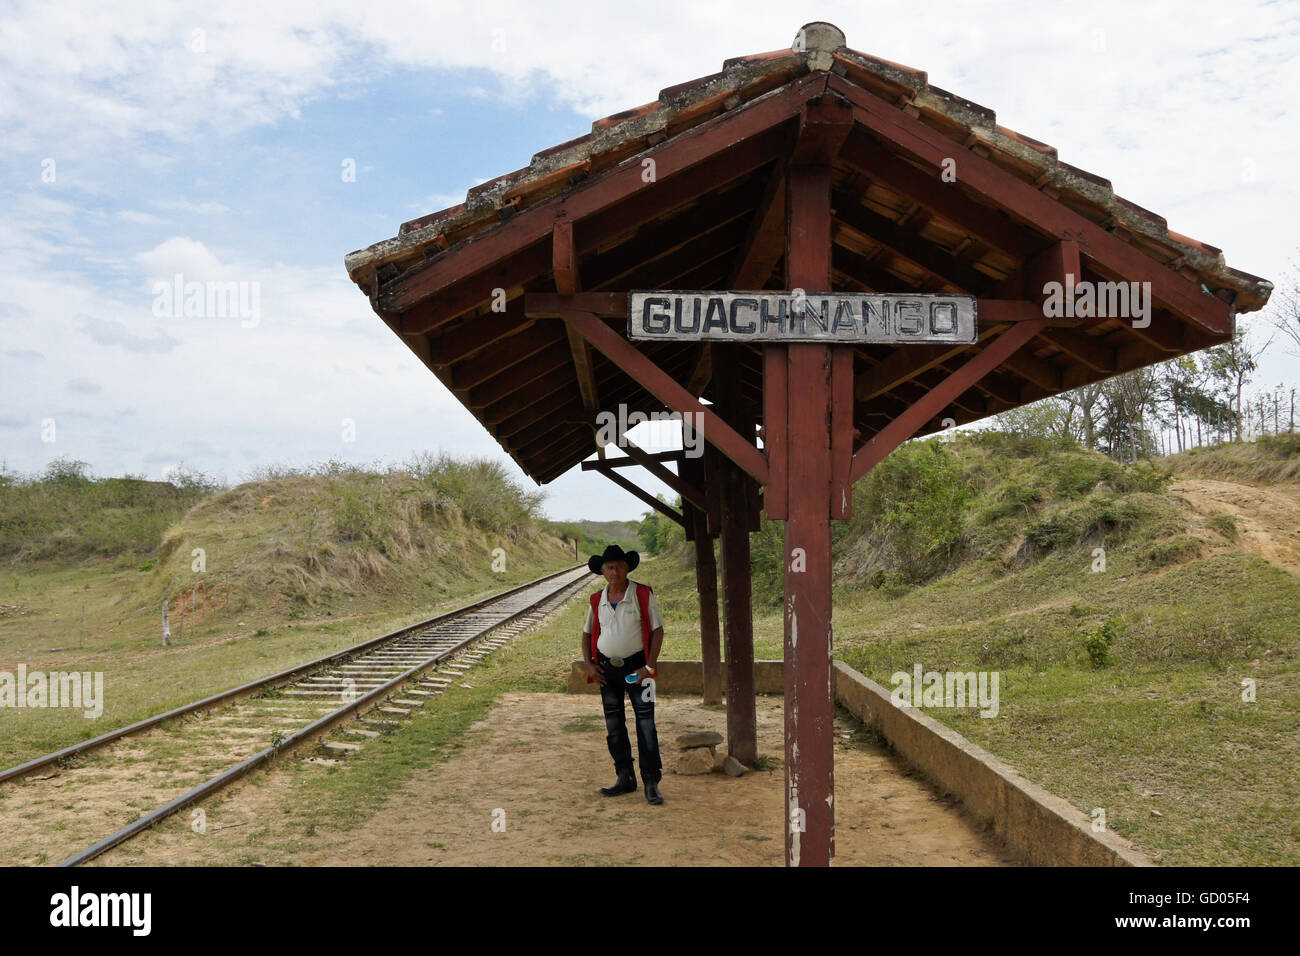 Man waiting for a train at the stop in Guachinango, Valle de los Ingenios (Valley of the Sugar Mills), Trinidad,  Cuba Stock Photo